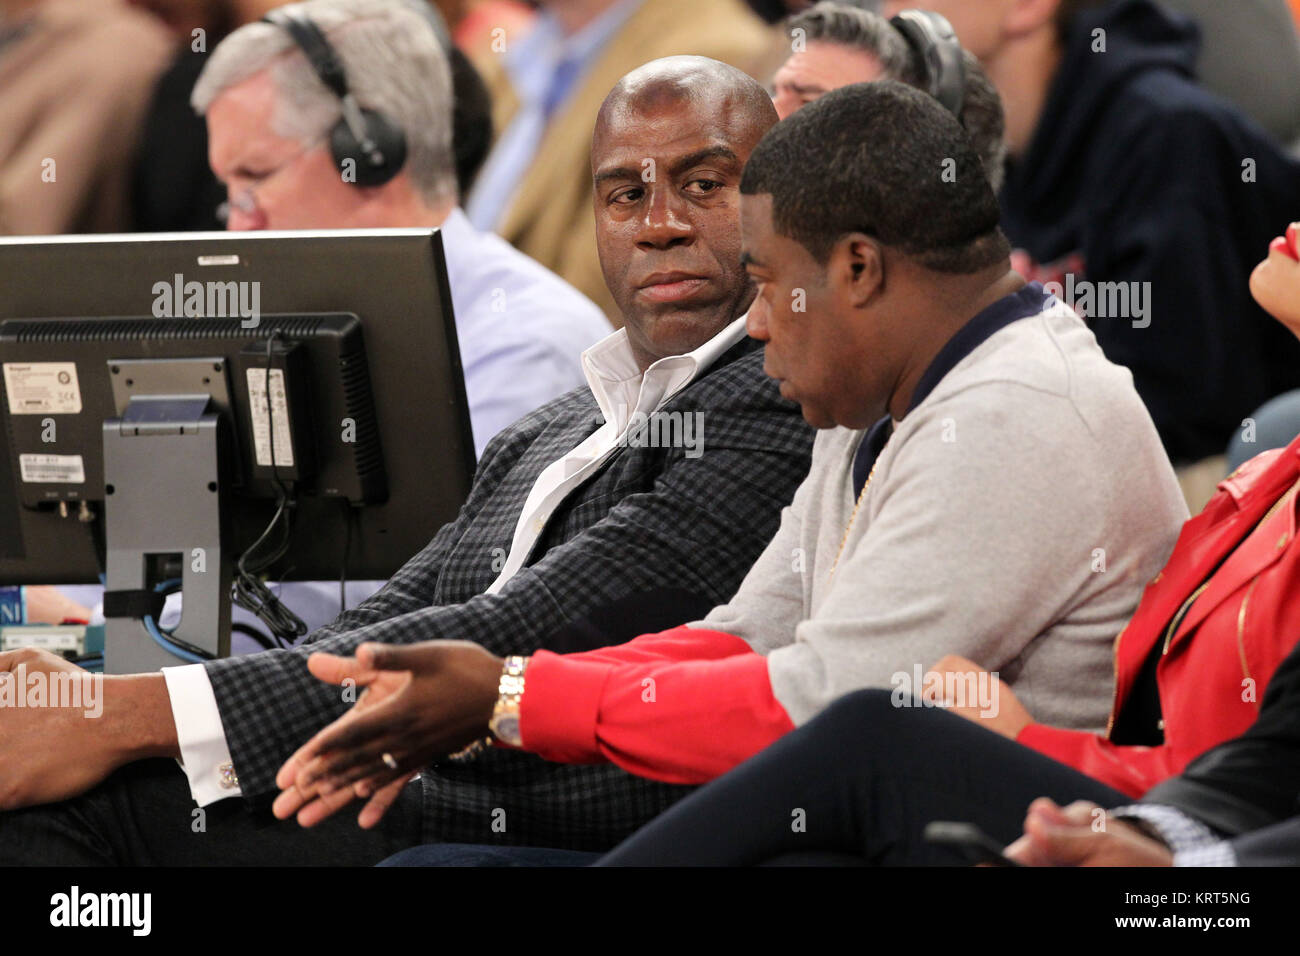 NEW YORK, NY - NOVEMBER 08: (Embargoed till November 10, 2015) Magic Johnson, Tracy Morgan with wife Megan Wollover sit with Michael K. Williams and  Director Spike Lee at the New York Knicks vs Los Angeles Lakers game at Madison Square Garden on November 8, 2015 in New York City.   People:  Tracy Morgan Stock Photo